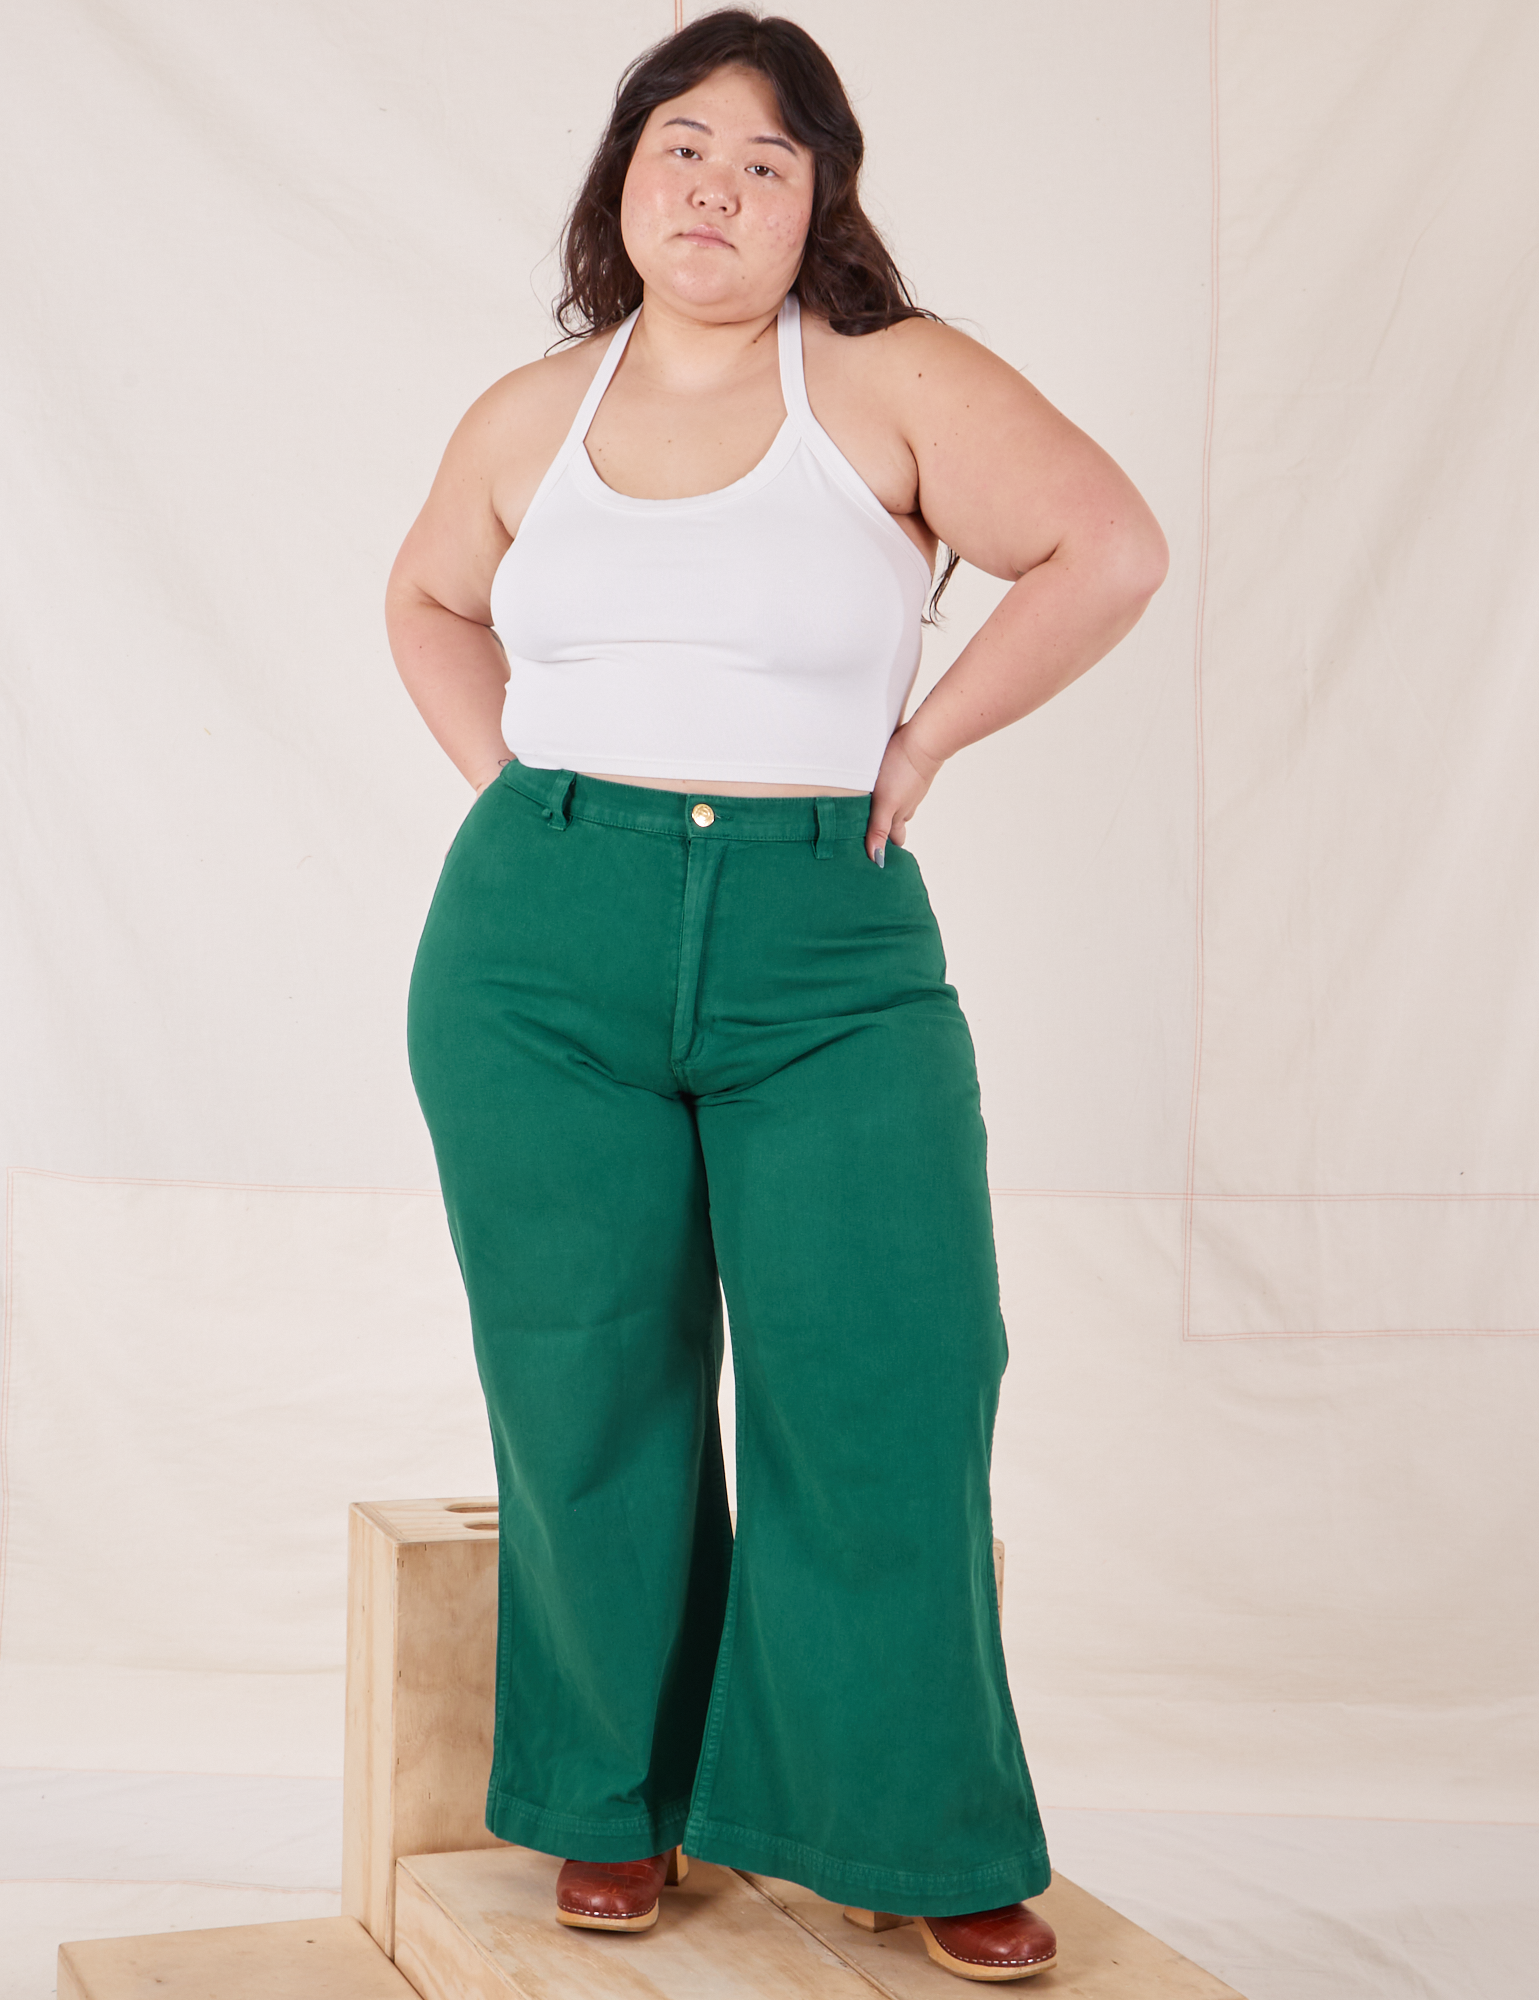 Ashley is wearing Bell Bottoms in Hunter Green and vintage off-white Halter Top